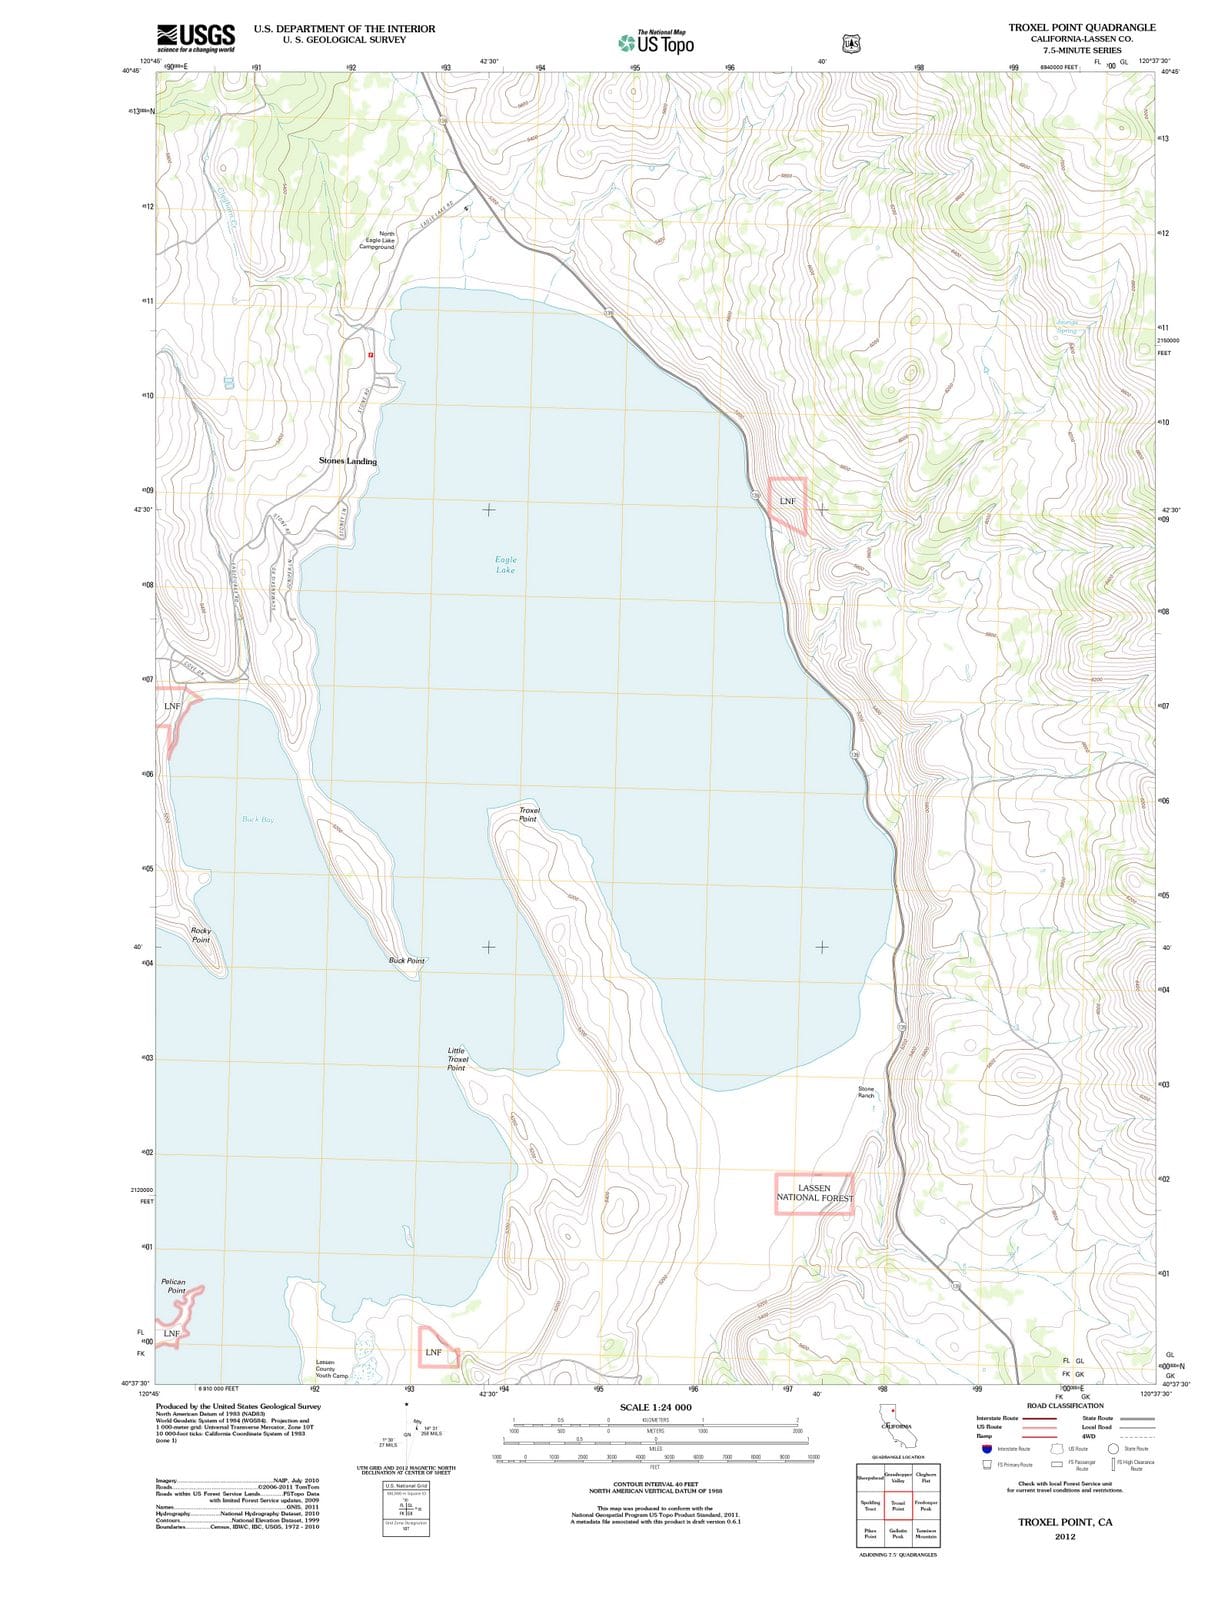 2012 Troxel Point, CA - California - USGS Topographic Map